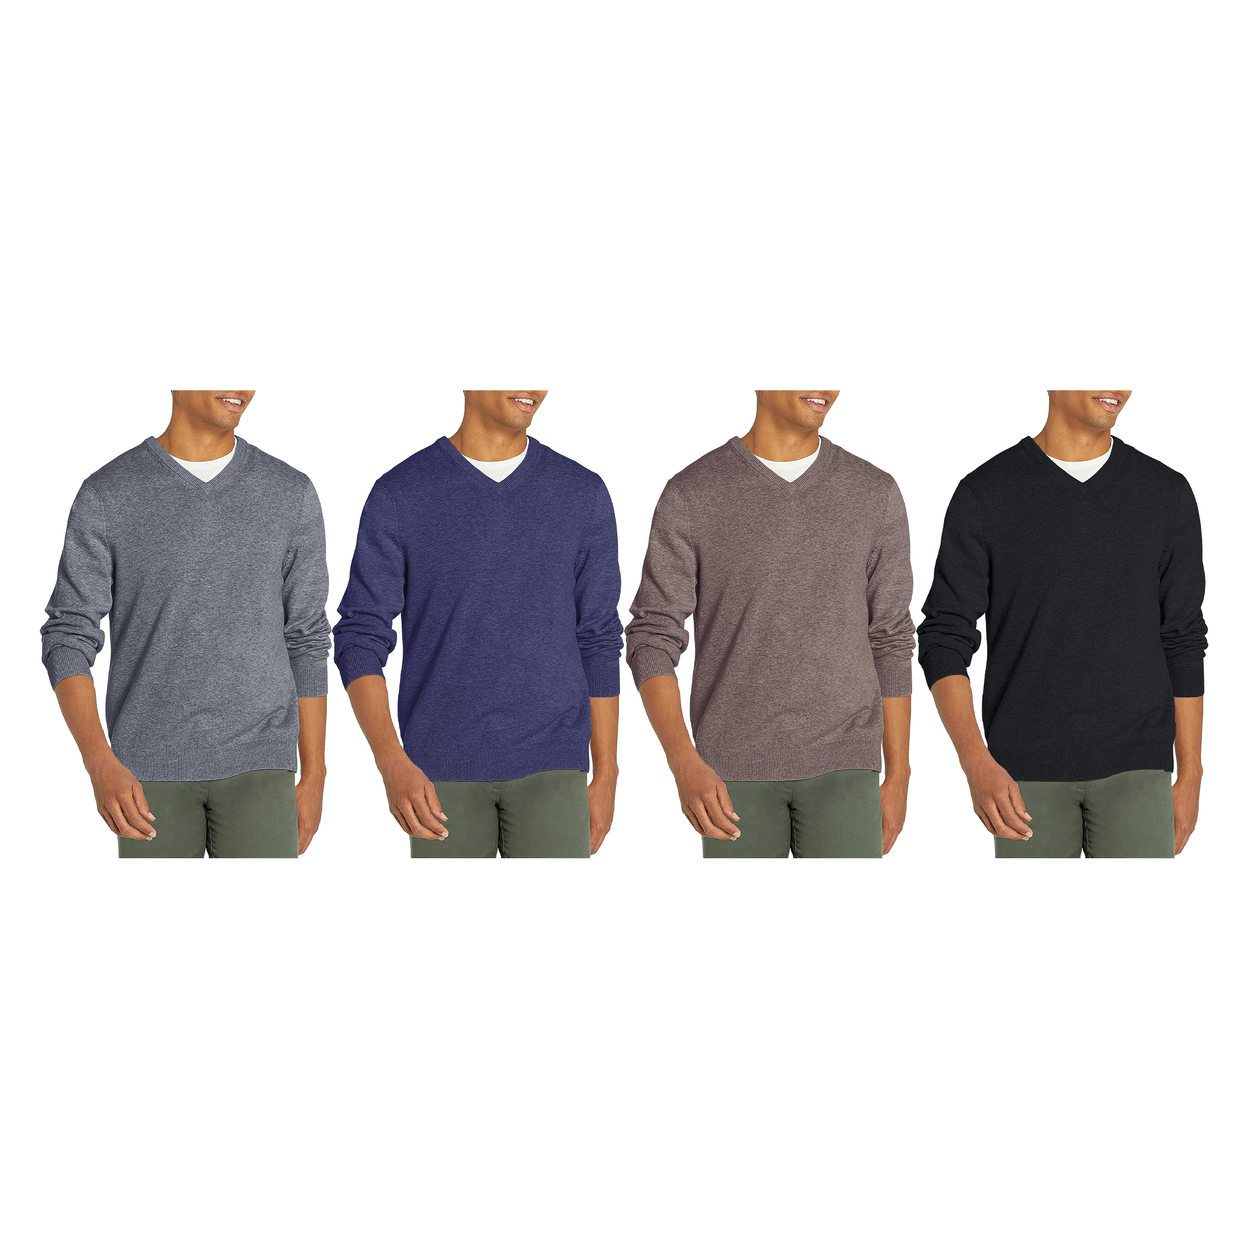 Multi-Pack: Men's Casual Ultra Soft Slim Fit Warm Knit V-Neck Sweater - 1-pack, Xx-large